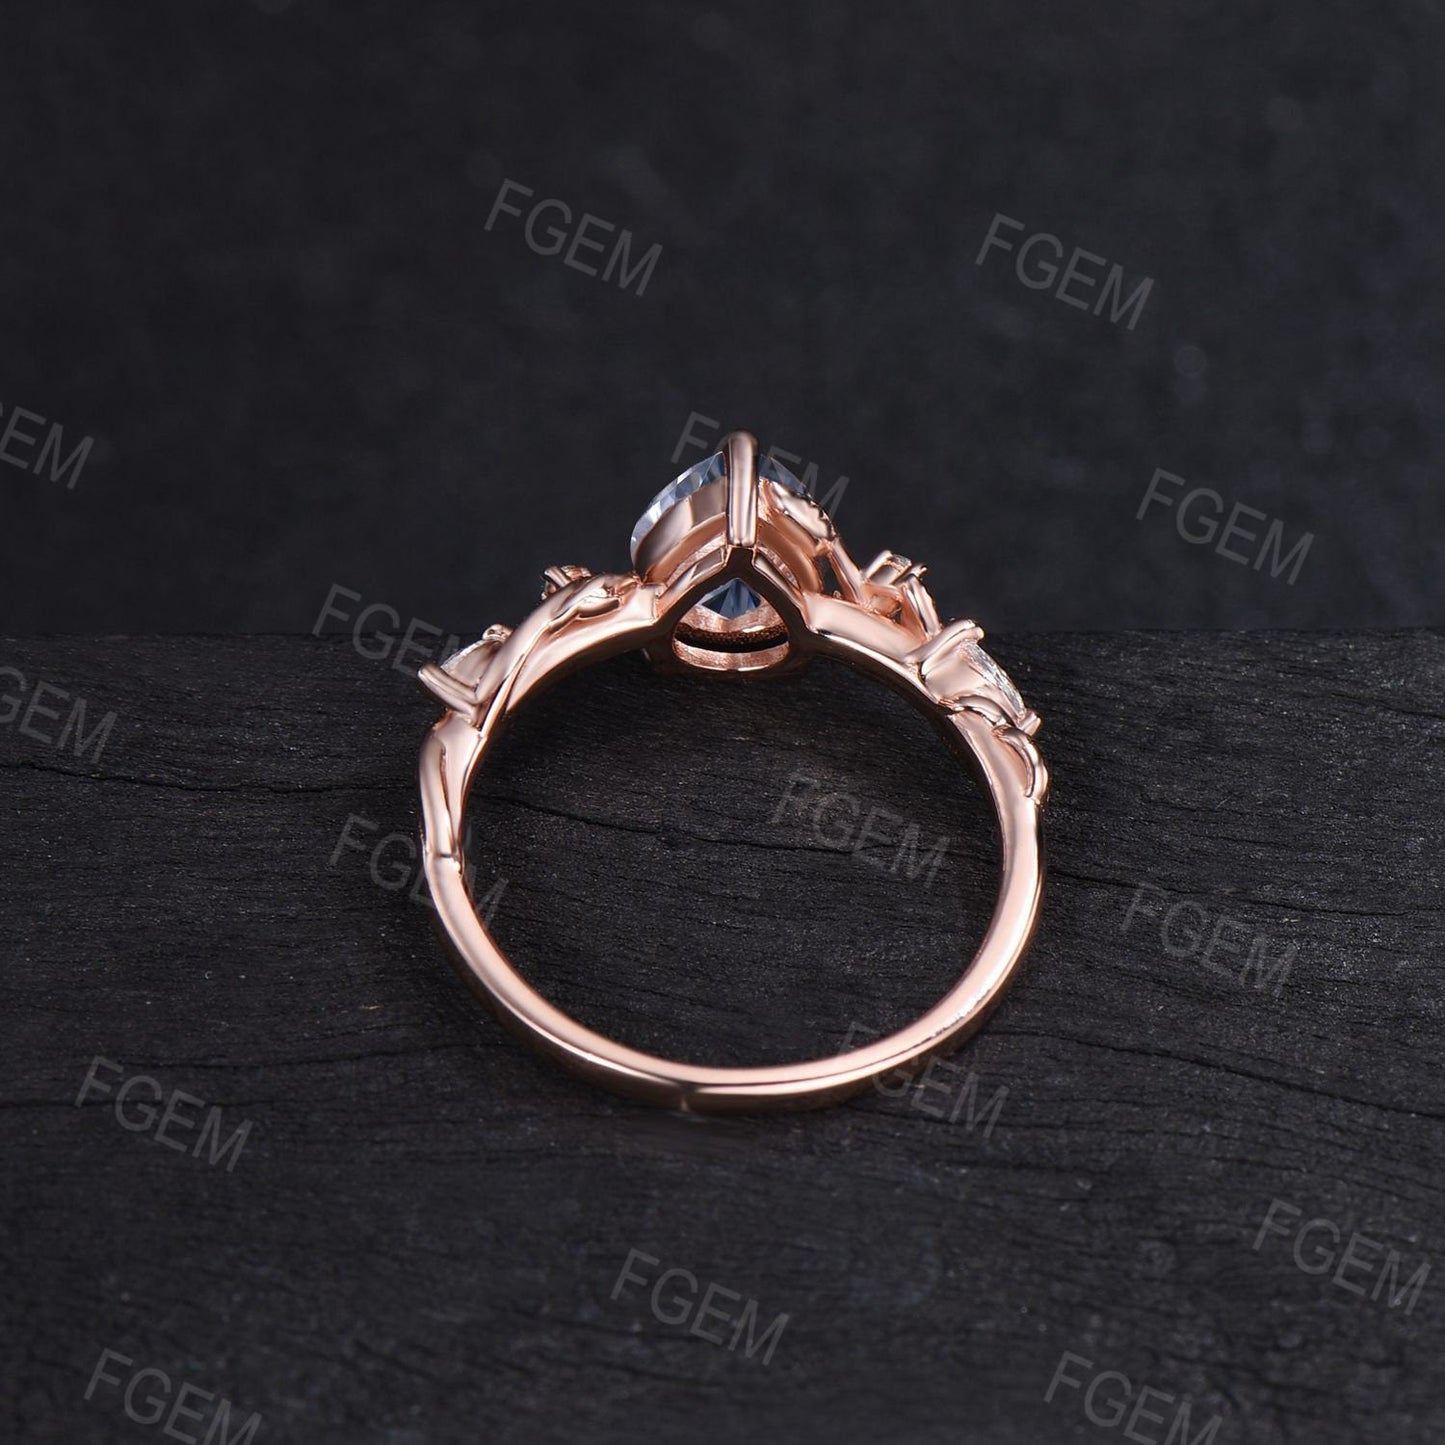 14K Rose Gold Nature Inspired Grey Moissanite Ring 1.25ct Pear Moissanite Diamond Jewelry Branch Leaf Wedding Ring Handmade Propose Gifts